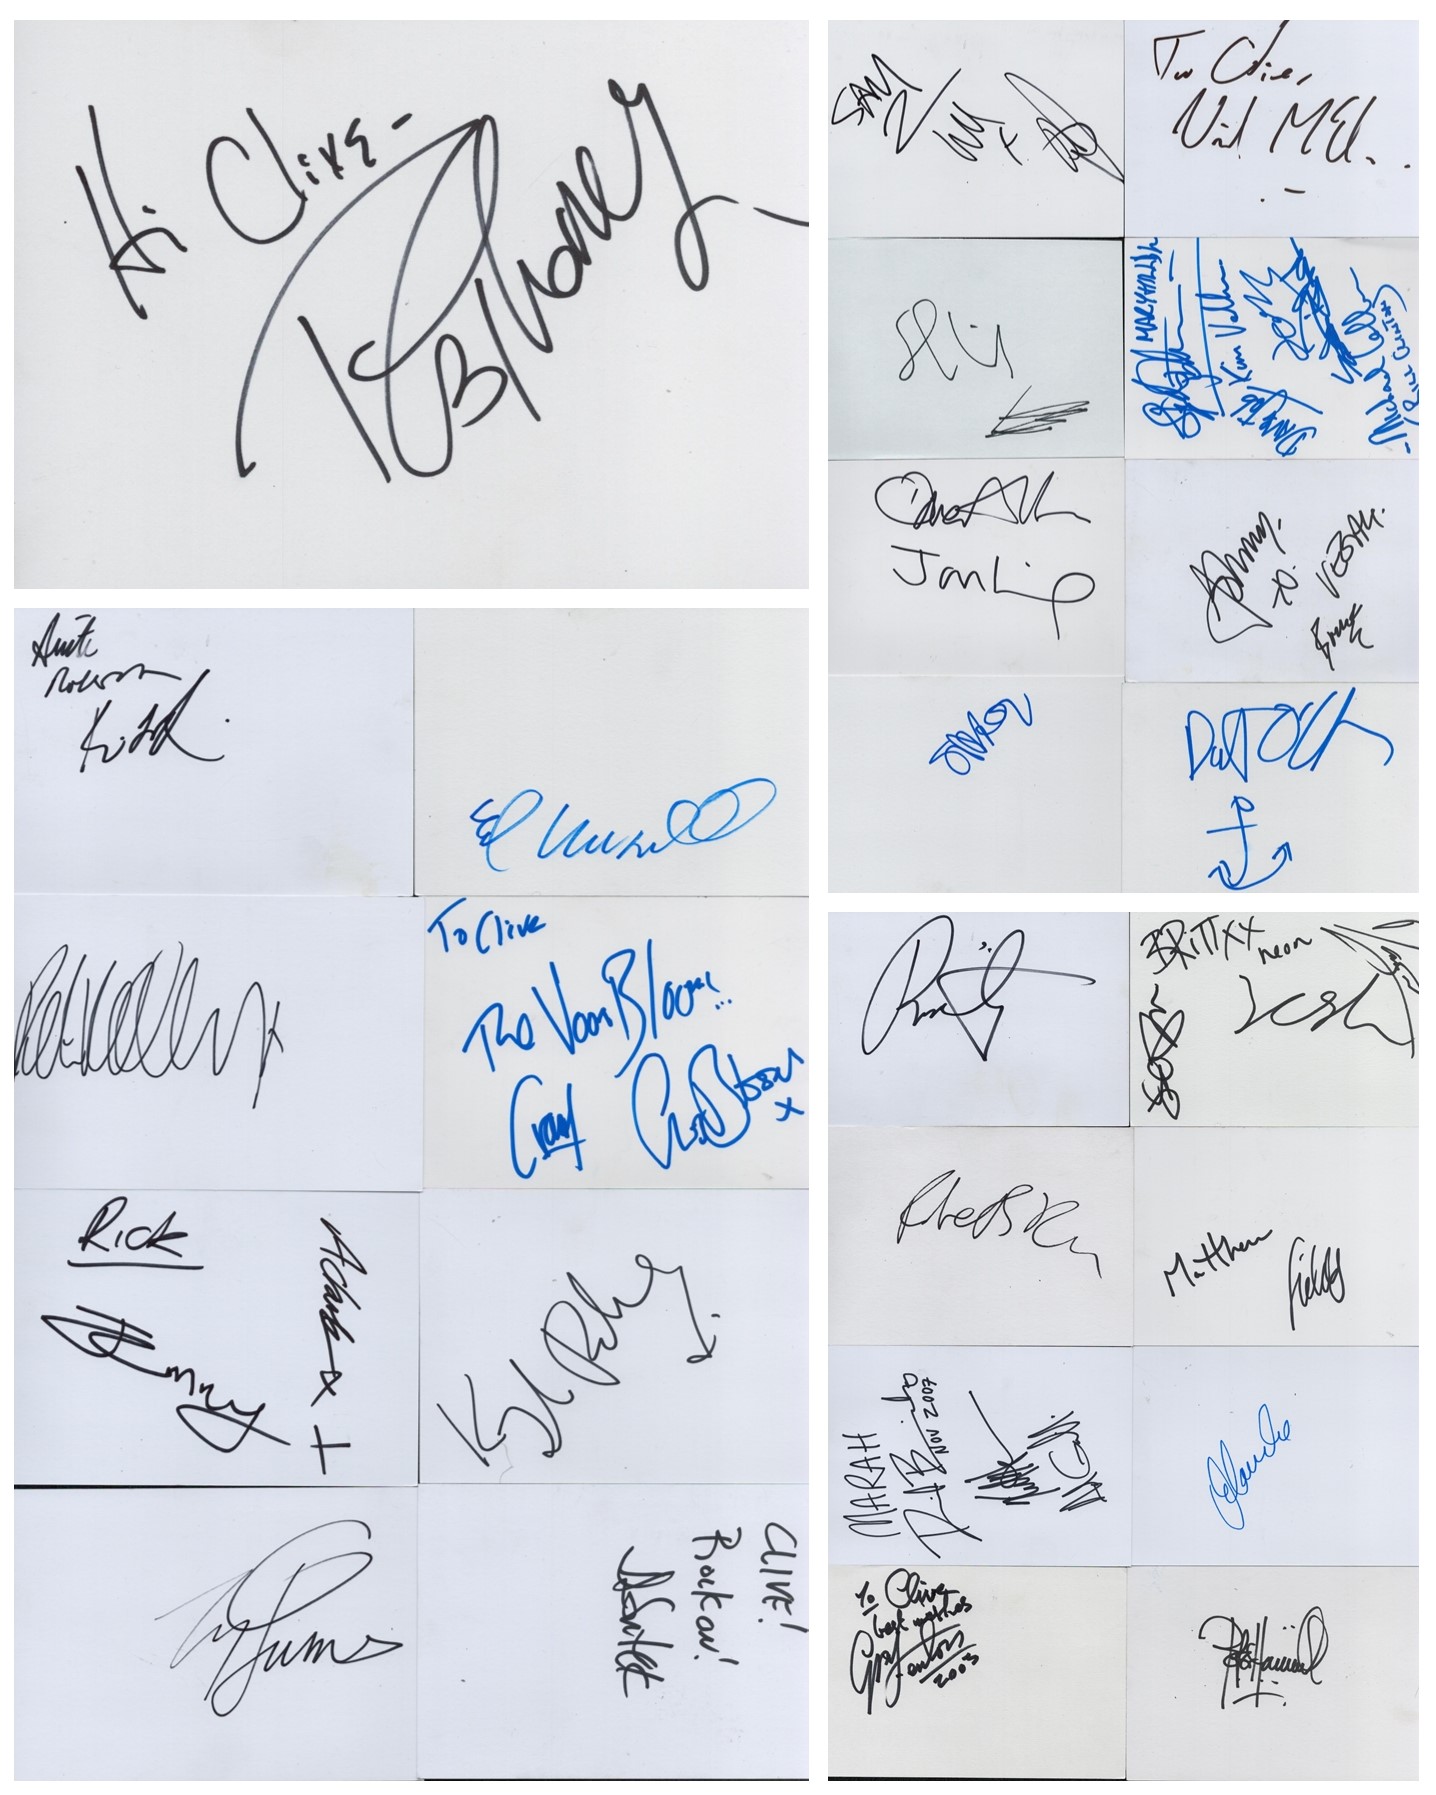 Rock Band/Punk Band and Band Musicians signed Autograph card signatures such as The Verve signed